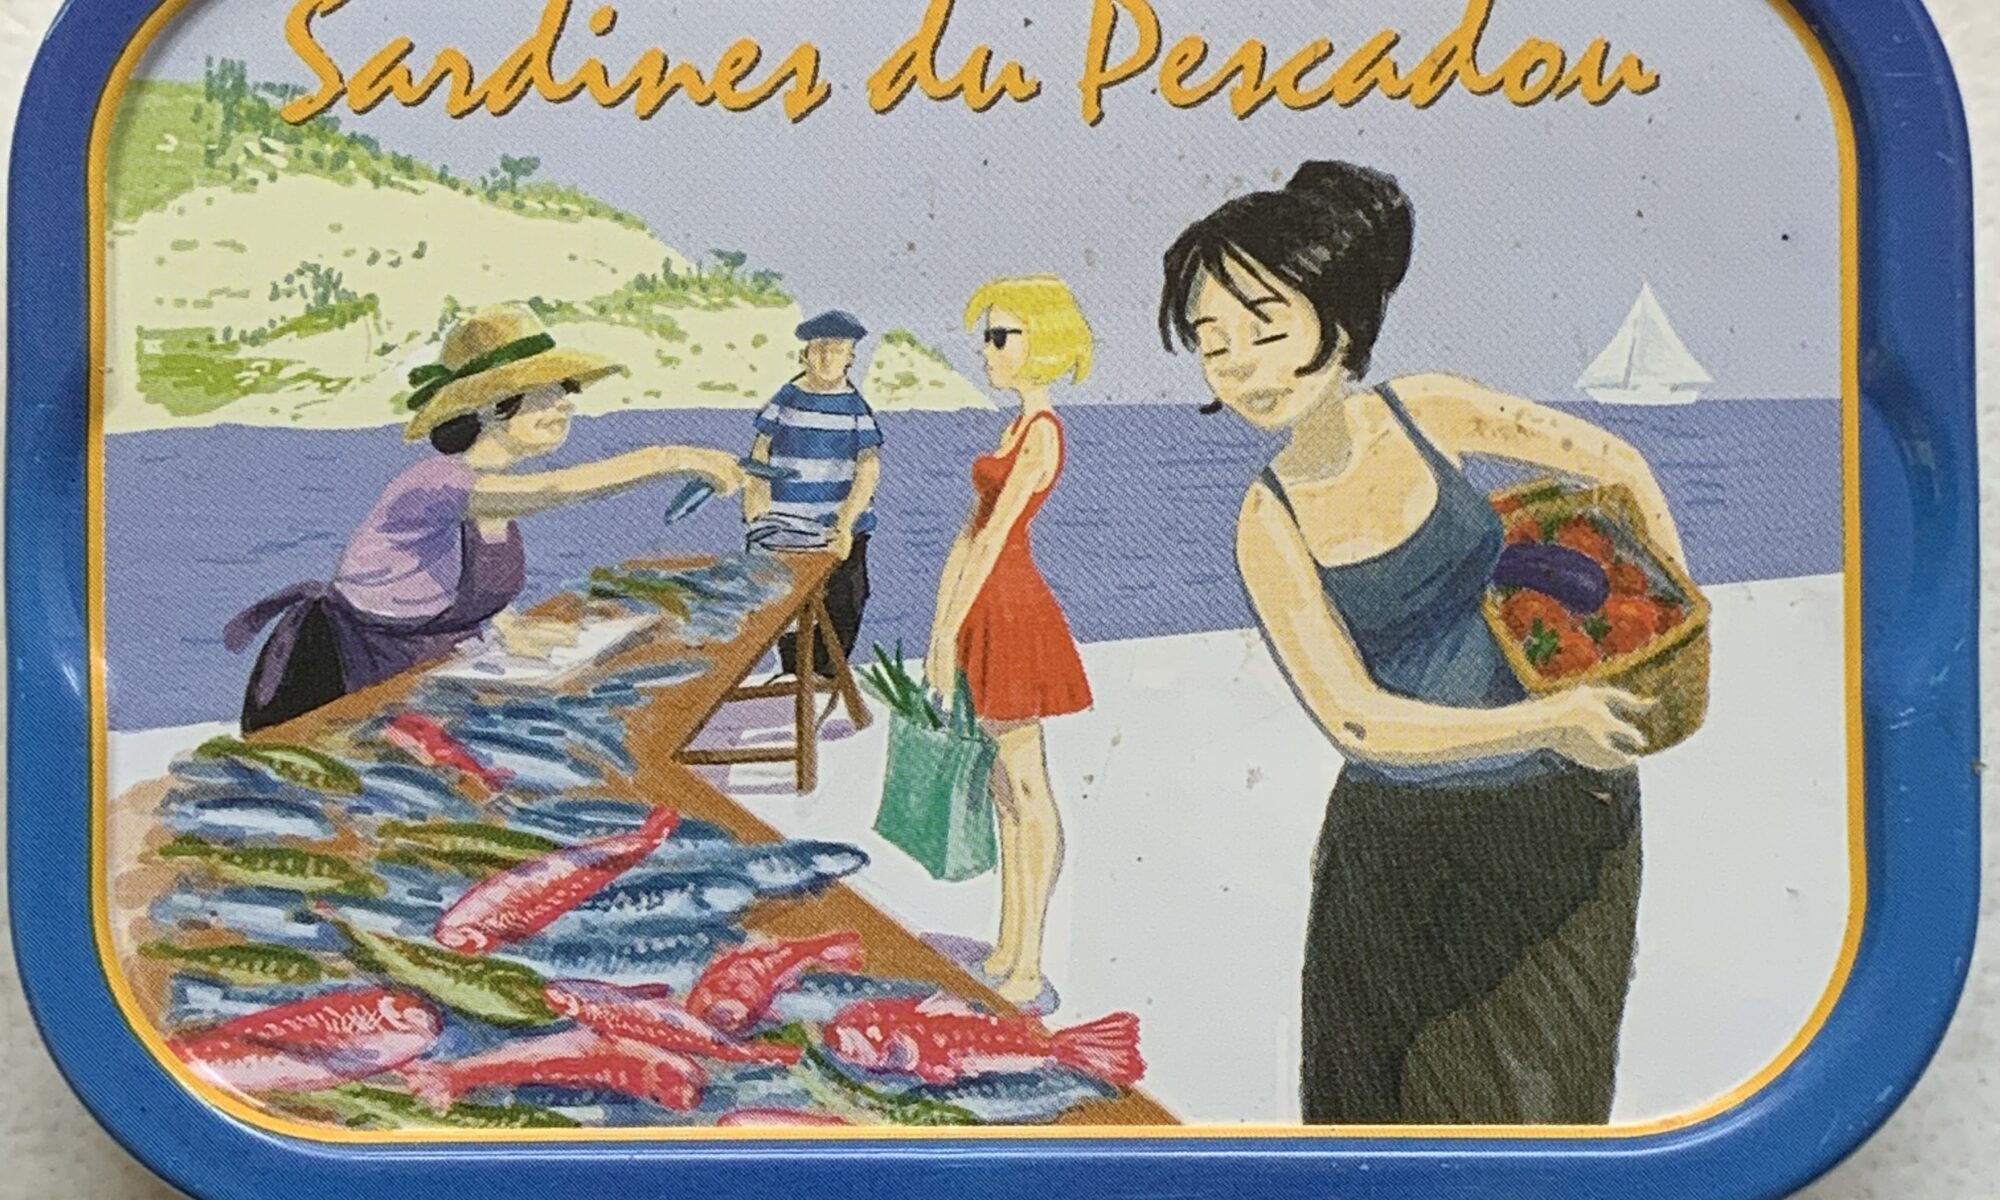 Image of the front of a tin of Ferrigno Les Belles de Marseille Sardines au Pescadou (Stewed in Lemon, Garlic, Parsley)